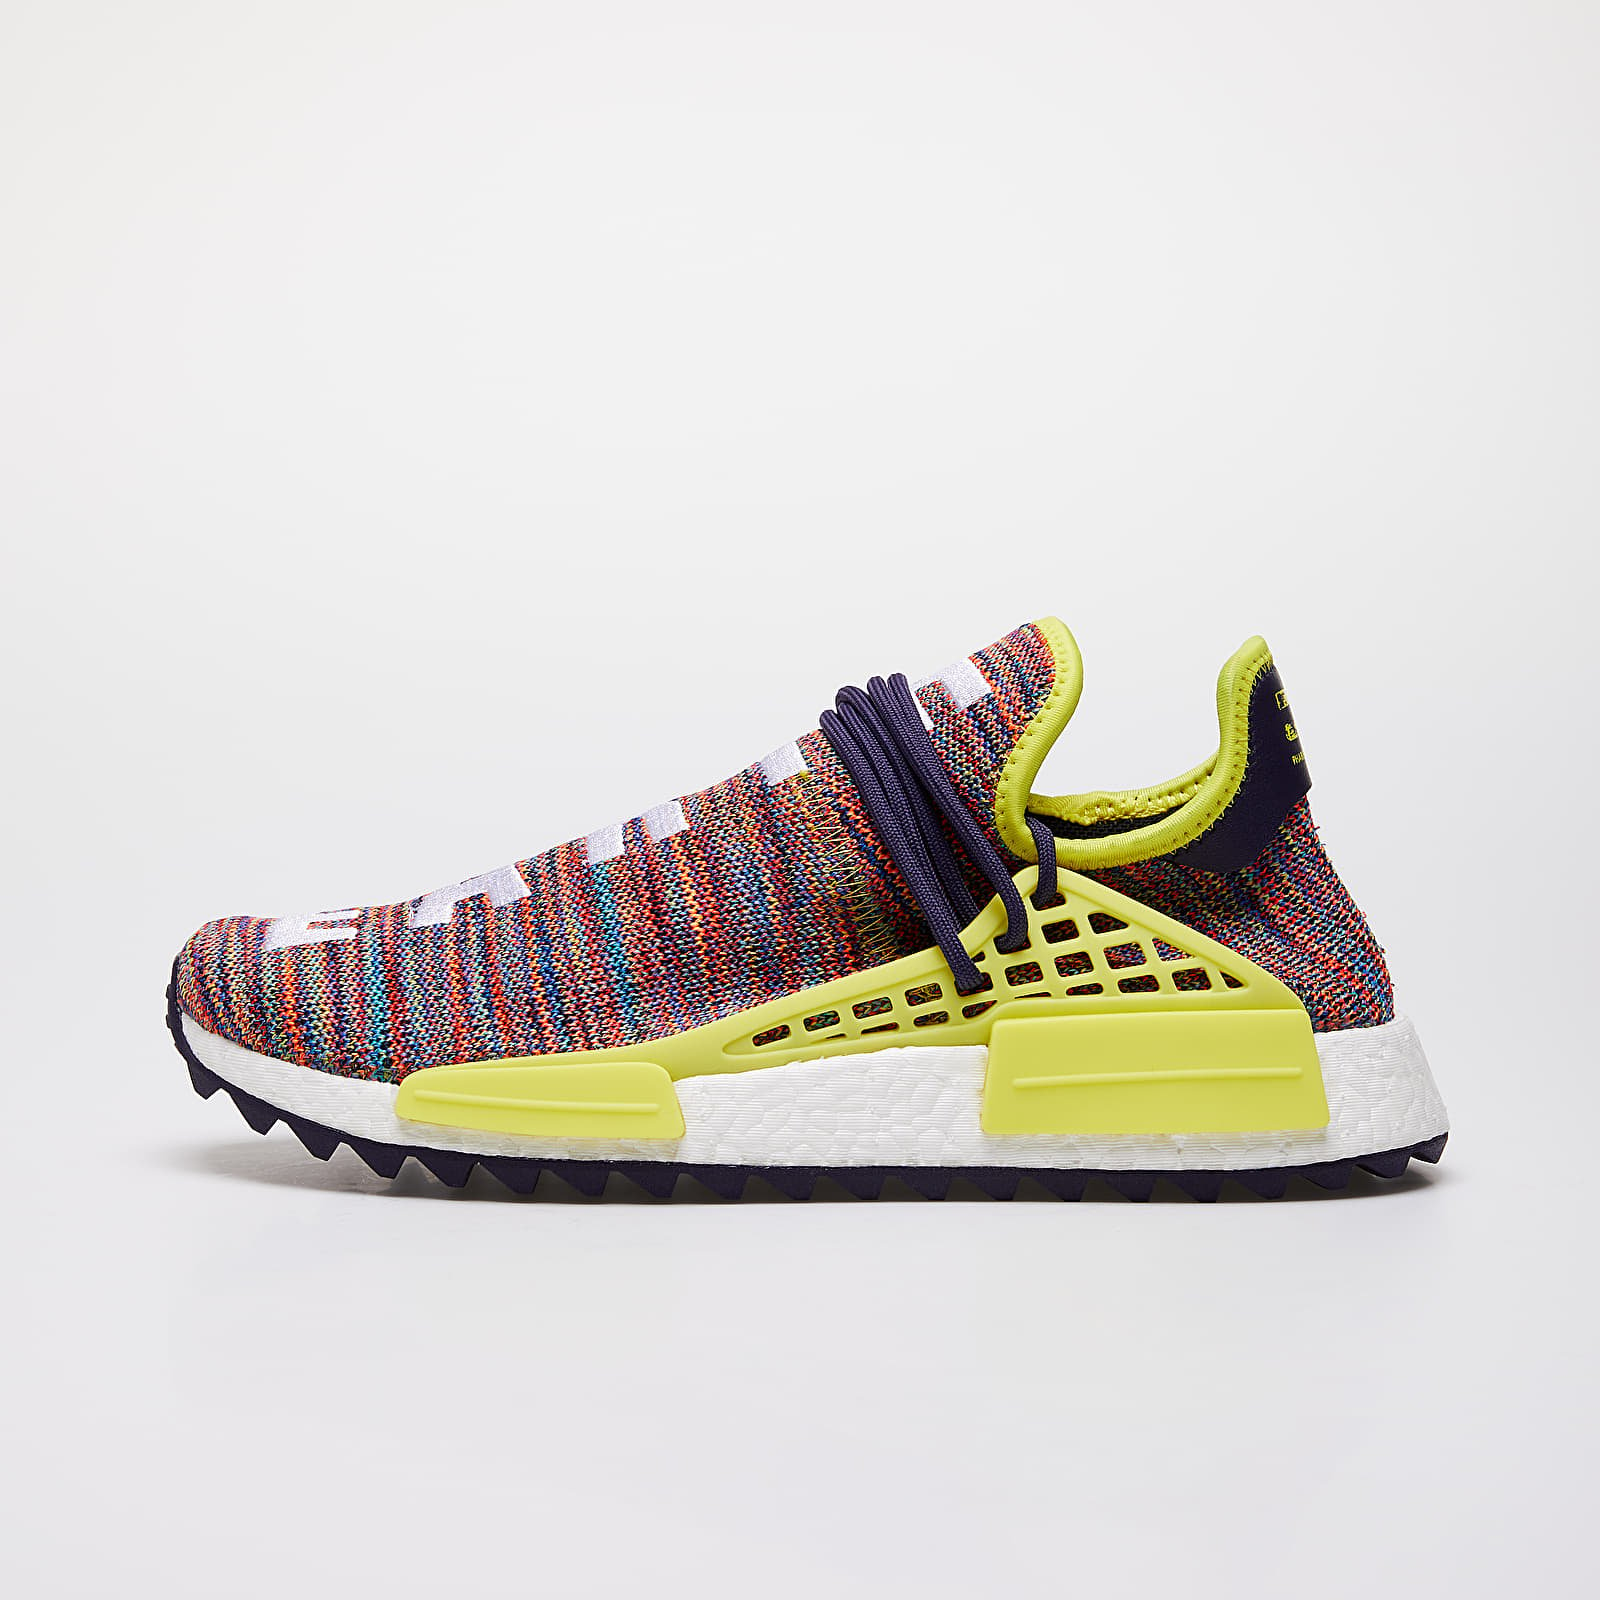 Men's shoes adidas x Pharrell Williams NMD "Hu Trail" Noble Ink/ Bold Yellow/ Ftw White